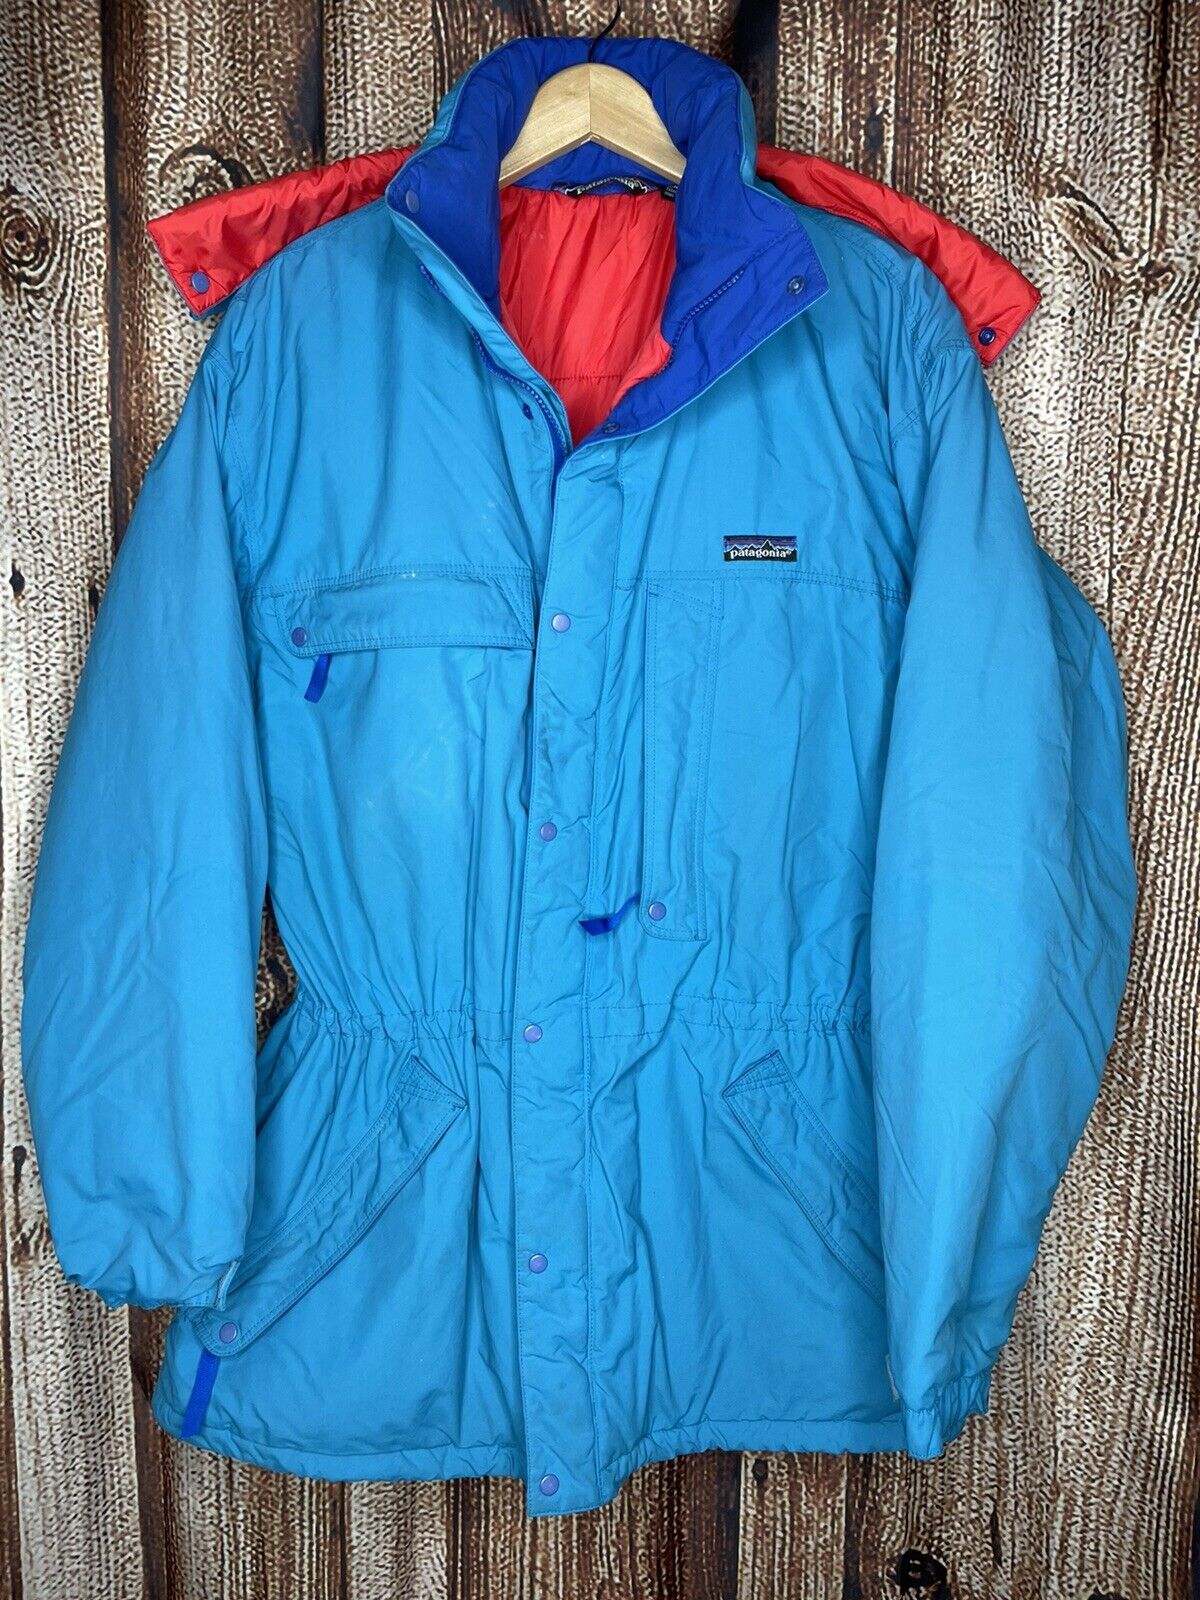 Vintage 90s Patagonia Storm Jacket Mens Blue Teal Red W/Hood Button Large